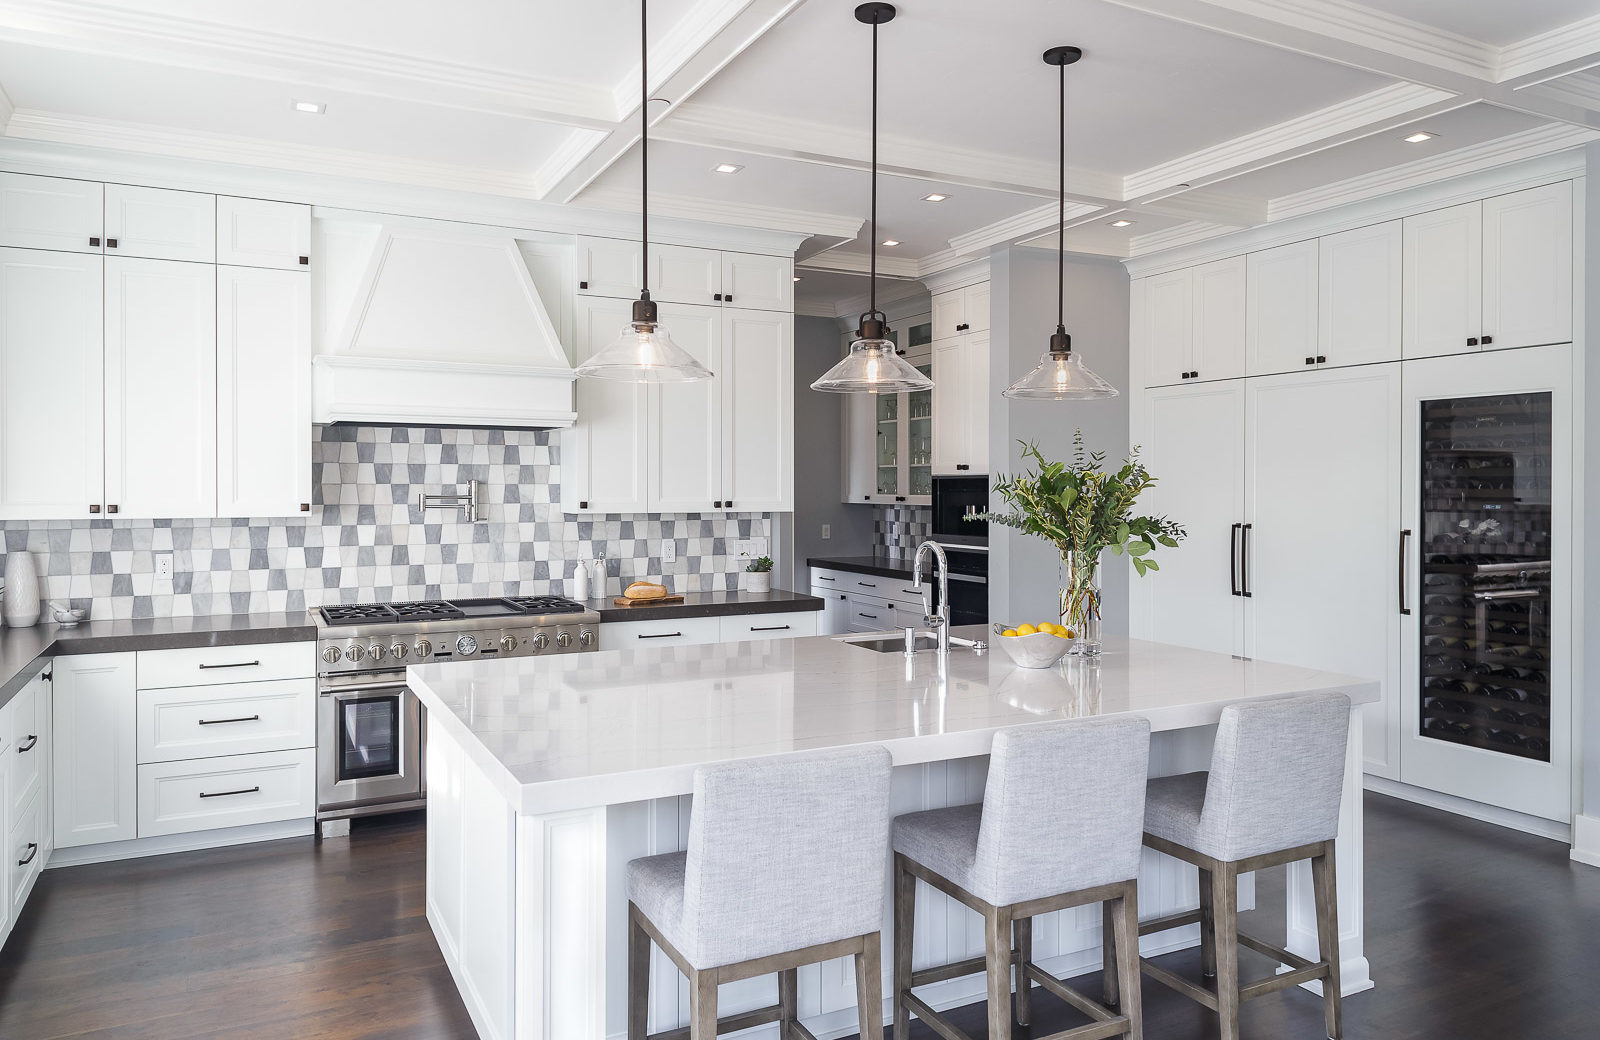 Large open plan kitchen remodel with large island, quartz countertops, white painted cabinets, gray checkered tile backsplash